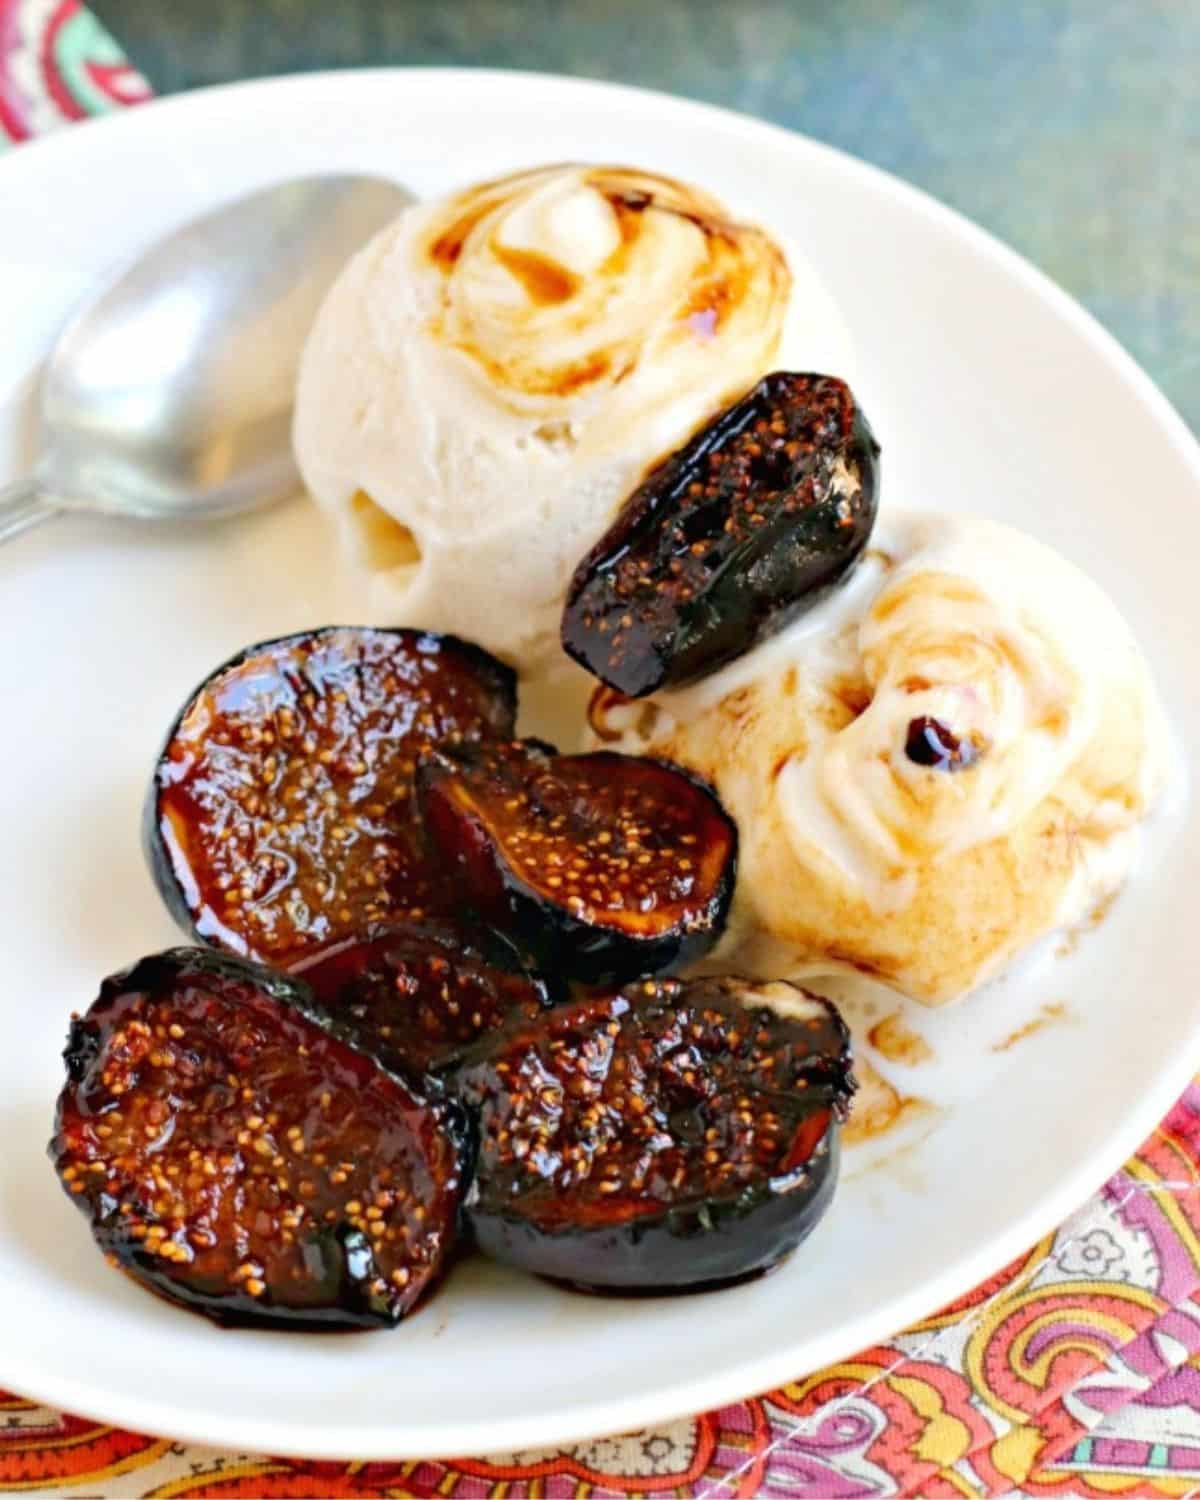 Scoops of vanilla ice cream on a plate topped with figs